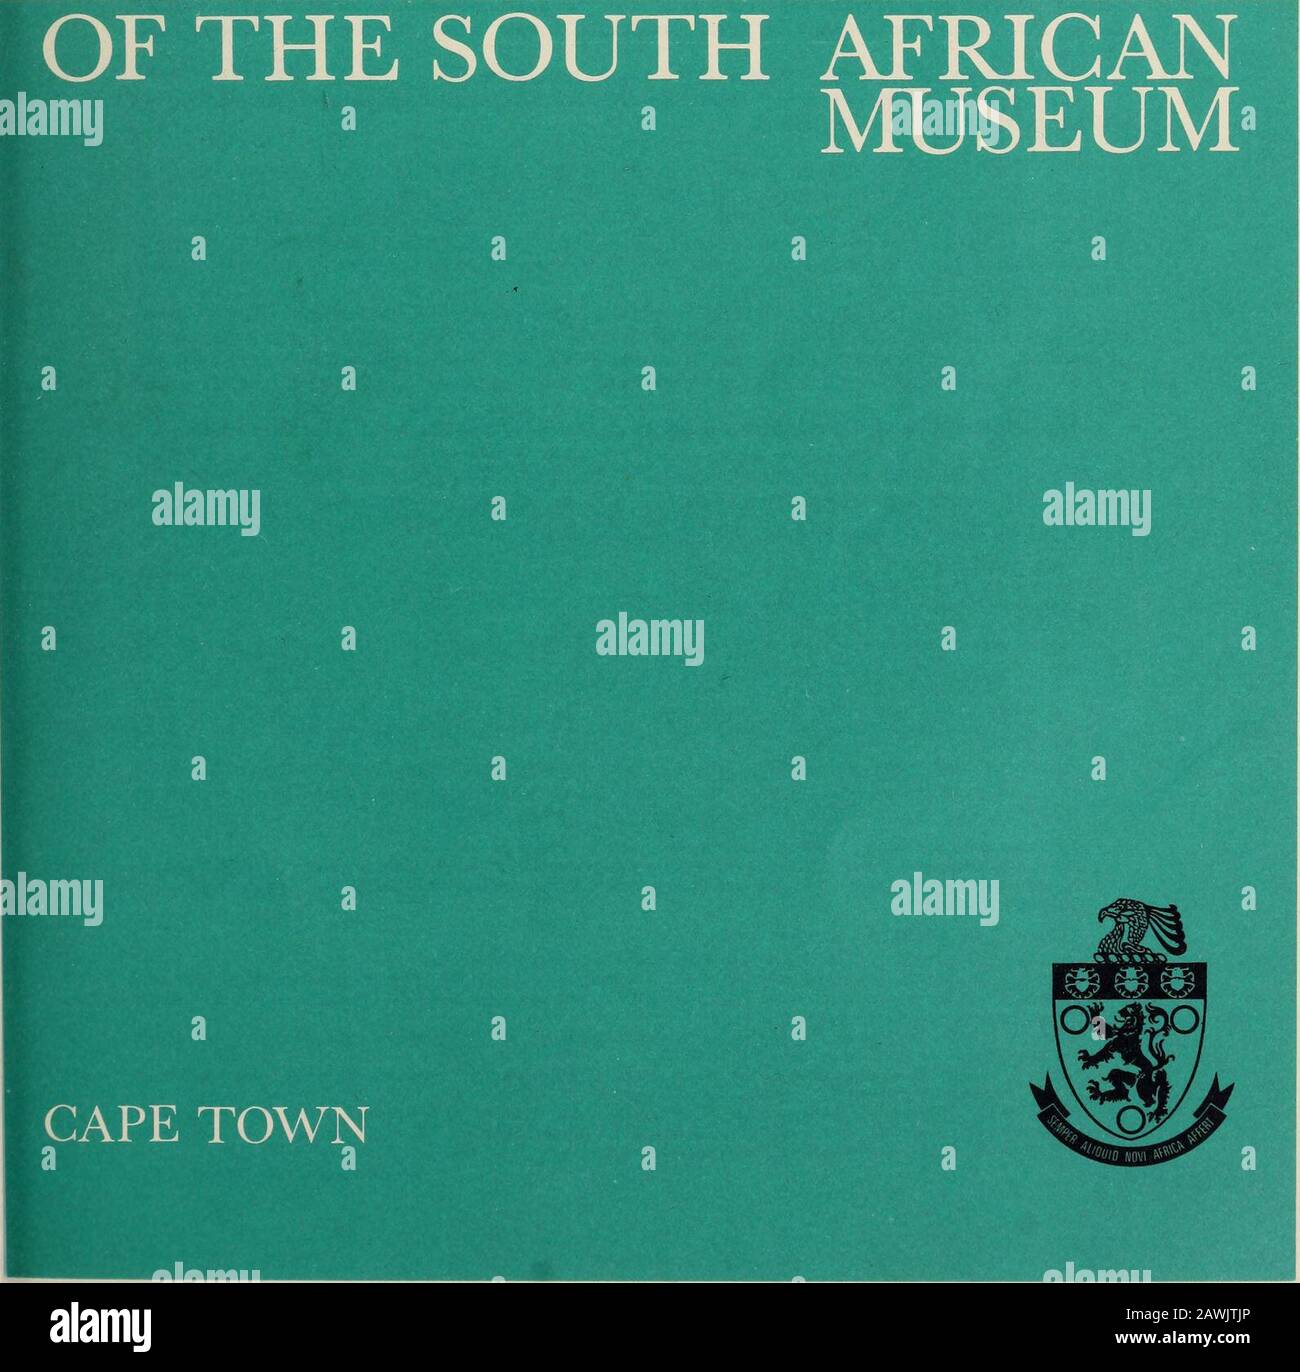 Annals of the South African Museum = Annale van die Suid-Afrikaanse Museum . r, W. G. see Dingle, R. V. et al.Simpson, E. S. W. see Dingle, R. V. et al.Summerhayes, C. P. see Dingle, R. V. et al.Westall, F. see Dingle, R. V. et al.Whatley, R. C. & Dingle, R. V. First record of an extant, sighted, shallow-water species of the genus Poseidonami- cus Benson (Ostracoda) from the continental margin of south-western Africa. (Published November 1989.) 437 Winter, A. see Dingle, R. V. et al.Woodborne, M. W. see Dingle, R. V. et al. WOOLDRIDGE, T. H. A new species of Mysidopsis (Mysidacea) from coastal Stock Photo